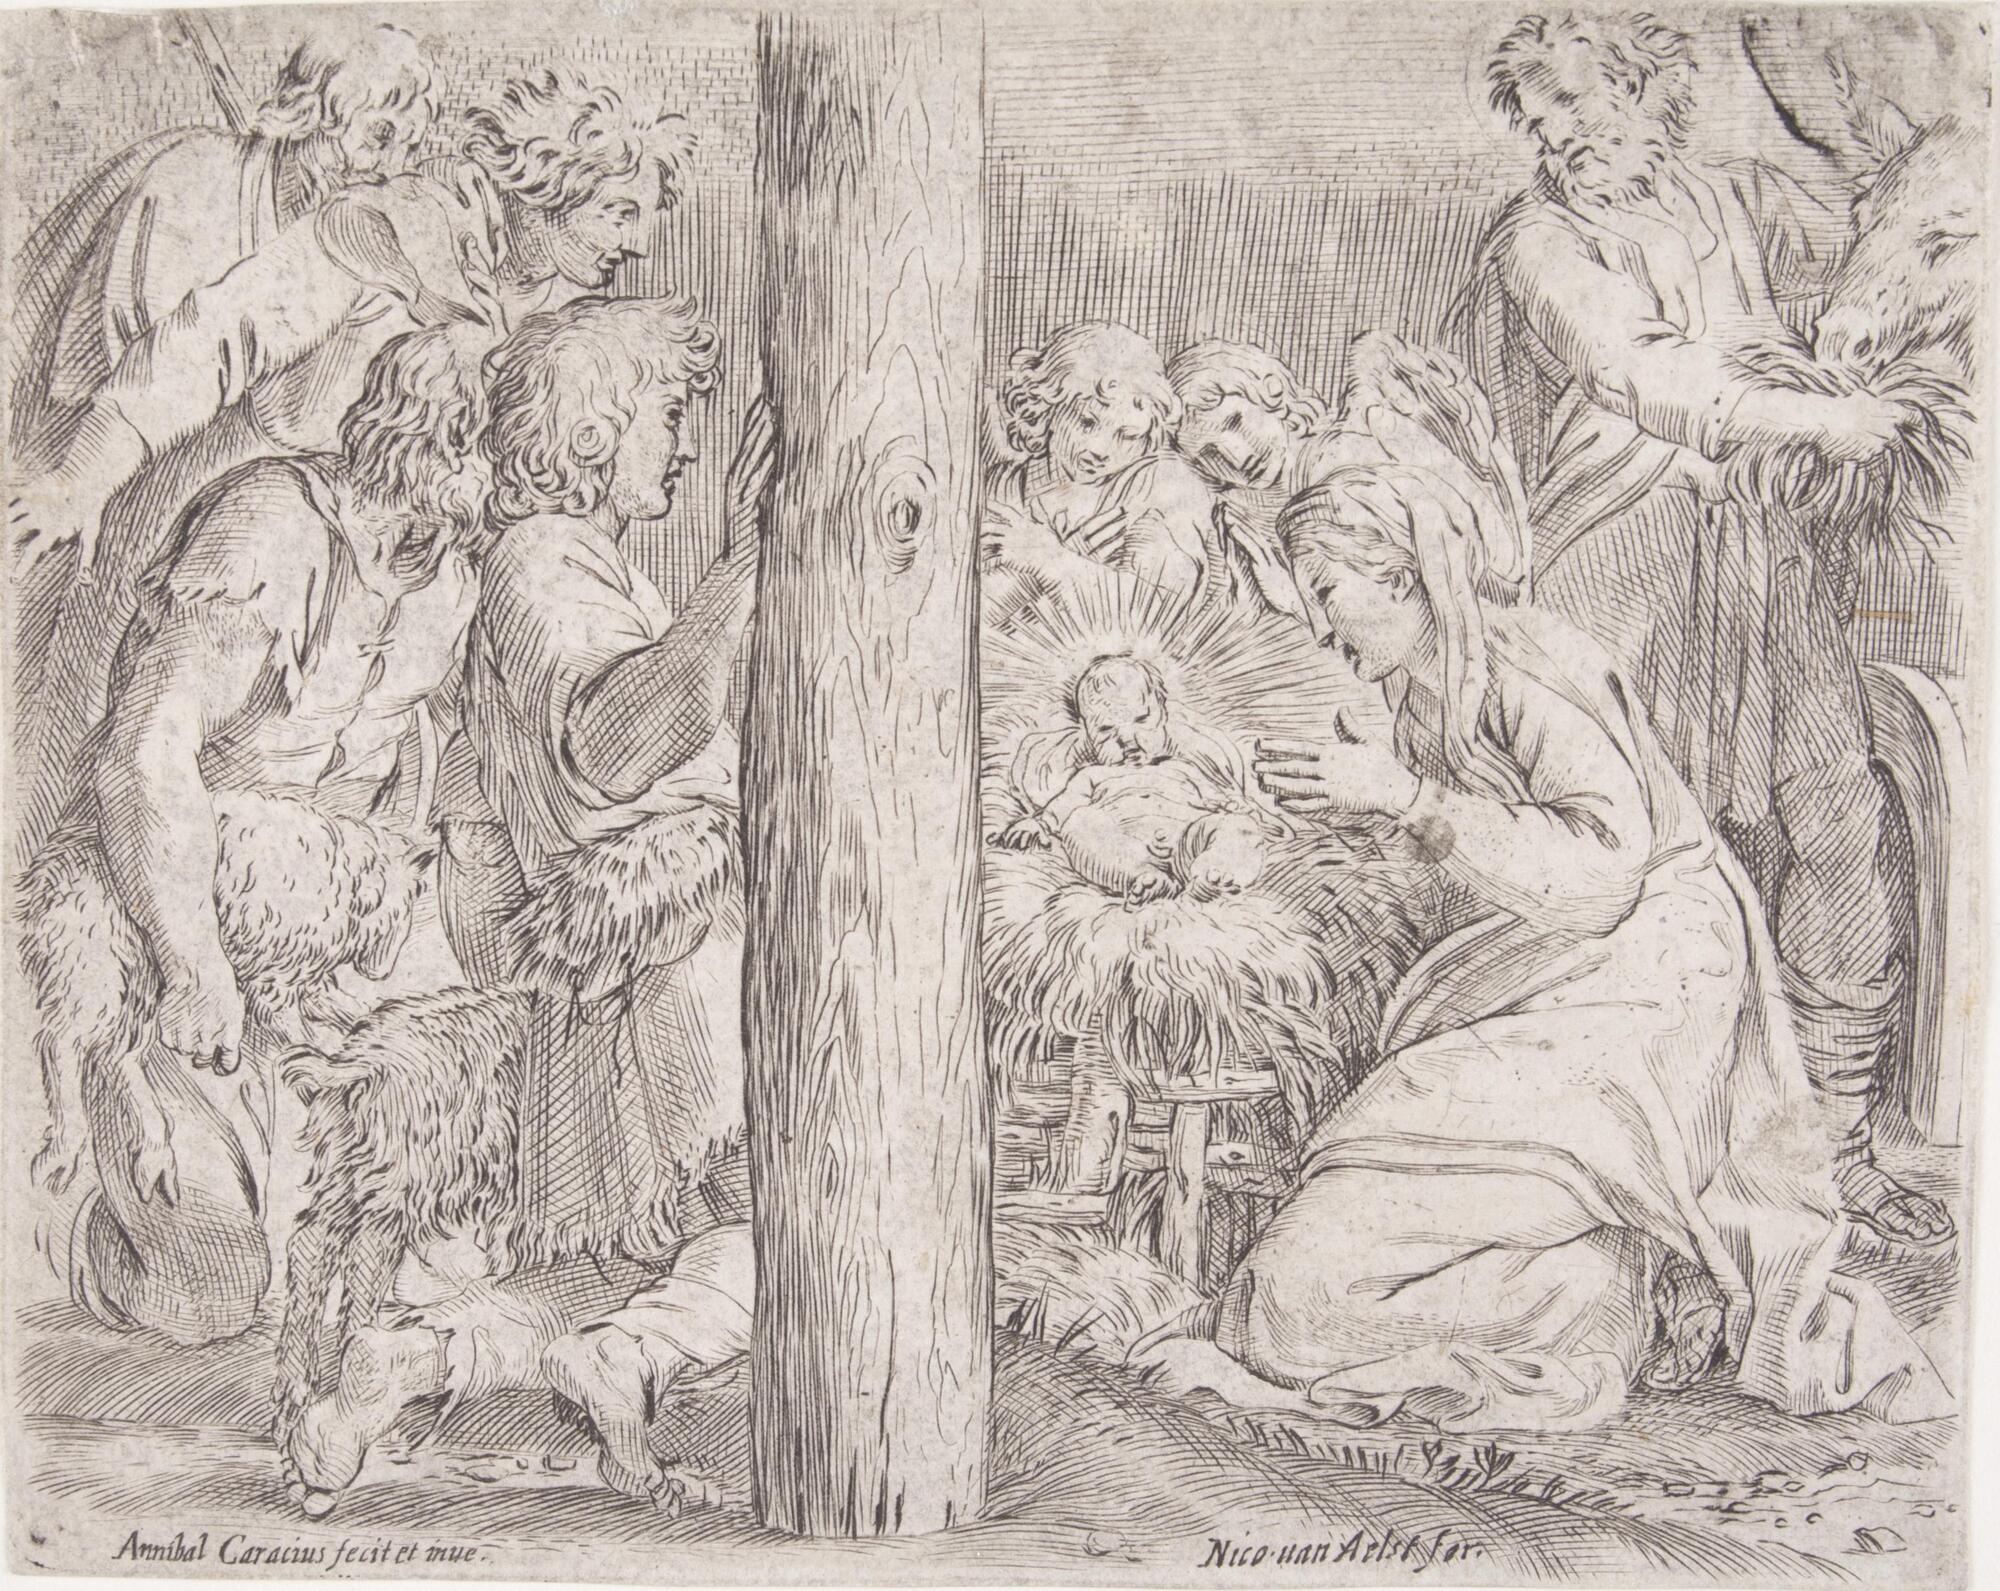 This black and white print depicts a scene with groups of figures separated compositionally by a large wooden post that is placed in the foreground of the composition, just left of center. Four male figures on the left look toward the scene on the right where a woman kneels in prayer before a child accompanied by two angels and a haloed man feeding hay to a donkey.